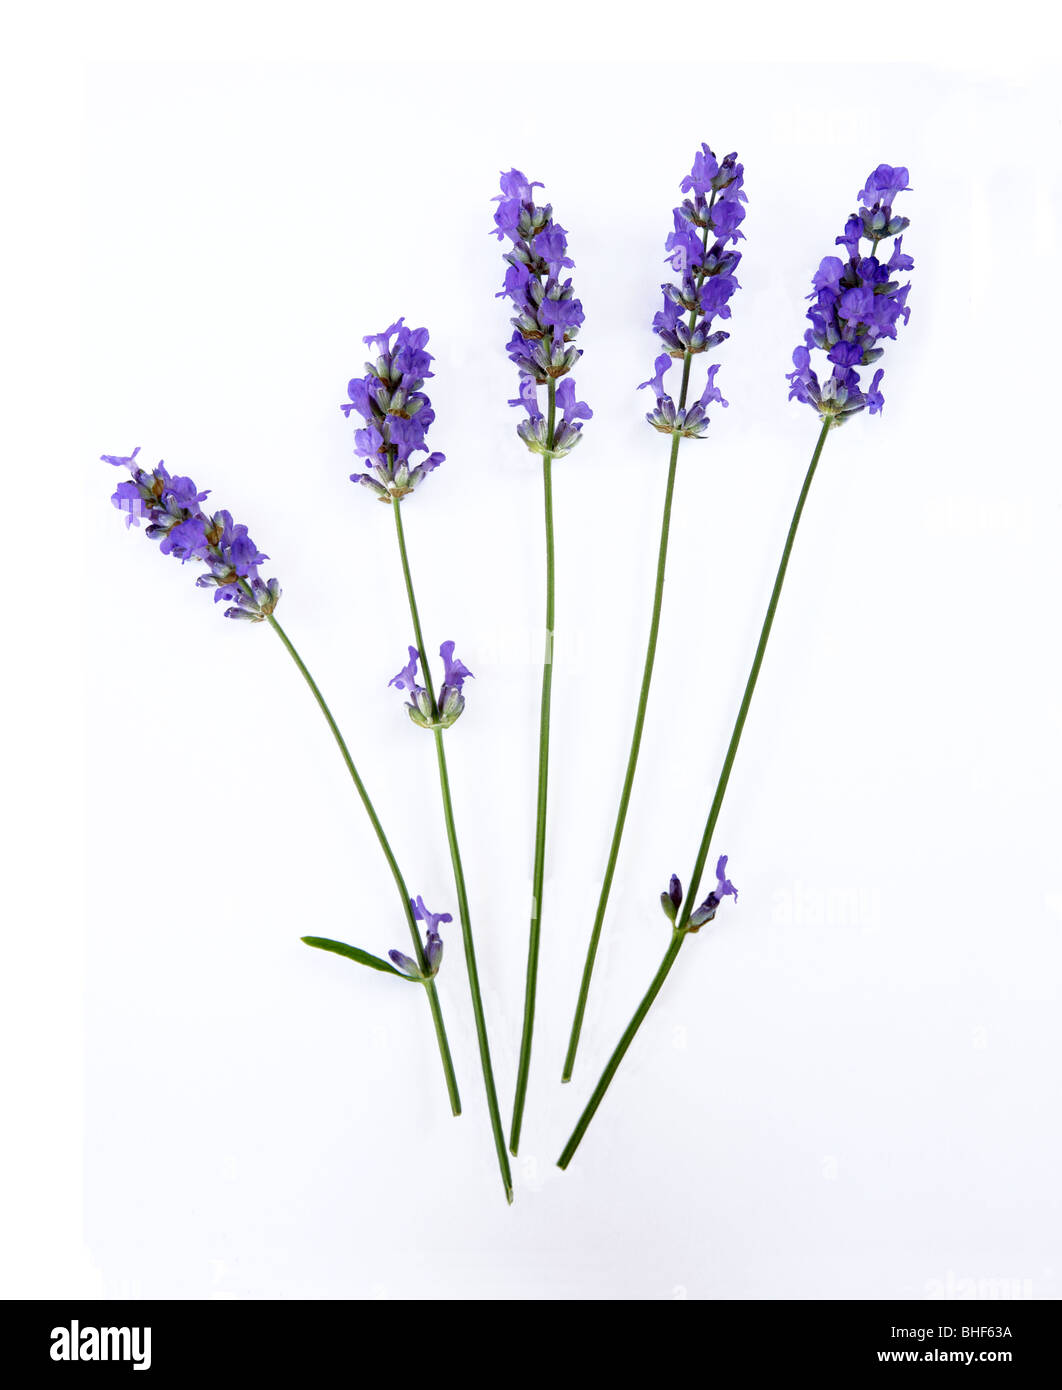 Five stems of lavender flowers on a white background. Stock Photo